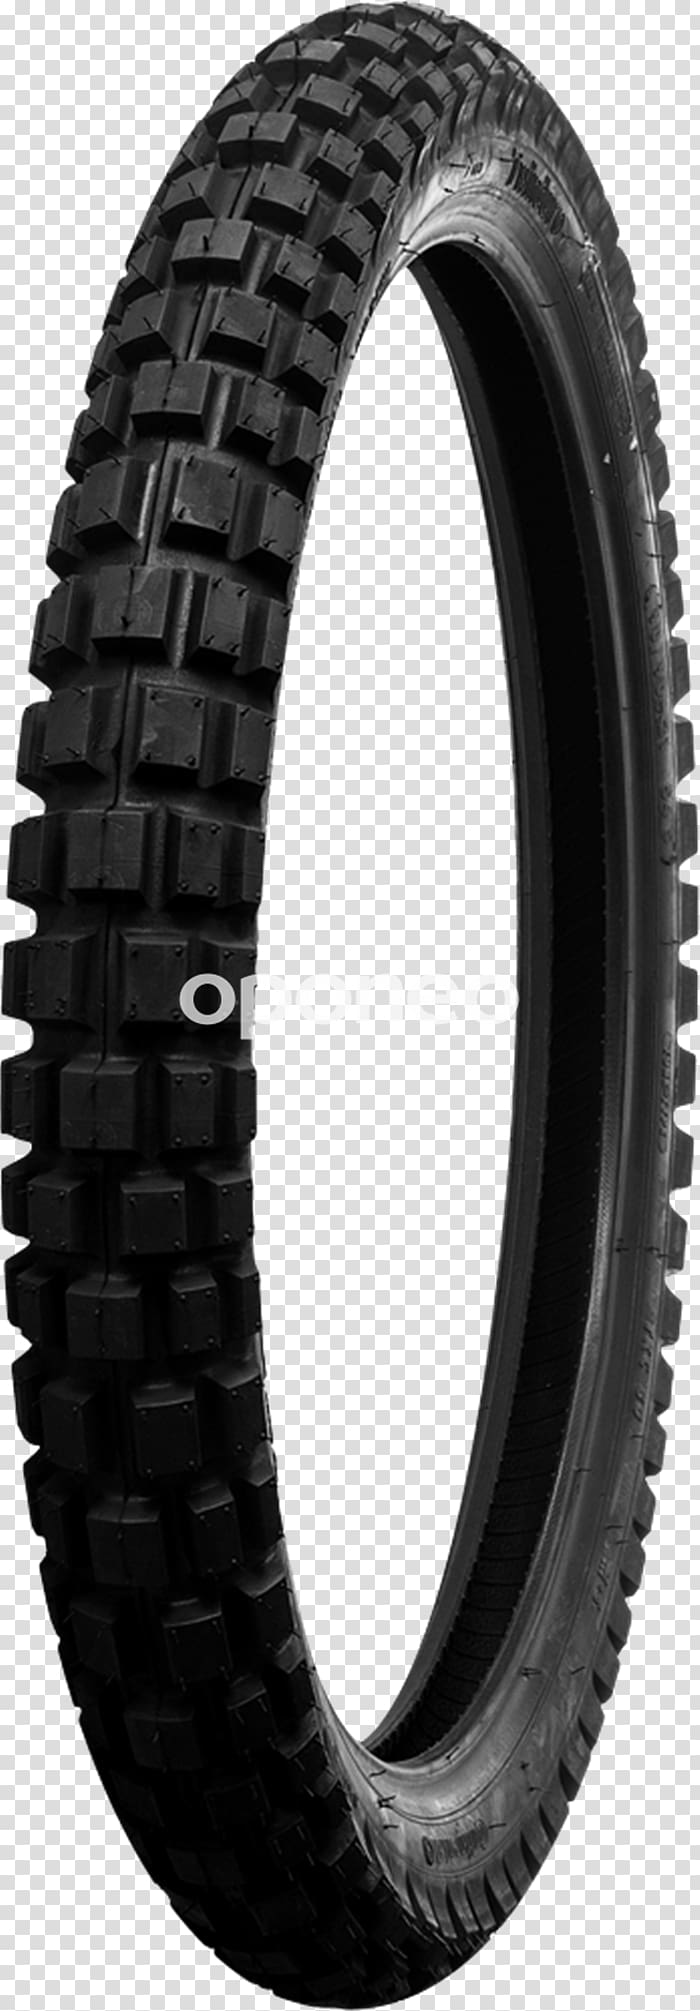 Continental AG Off-road tire Motorcycle Kenda Rubber Industrial Company, motorcycle transparent background PNG clipart